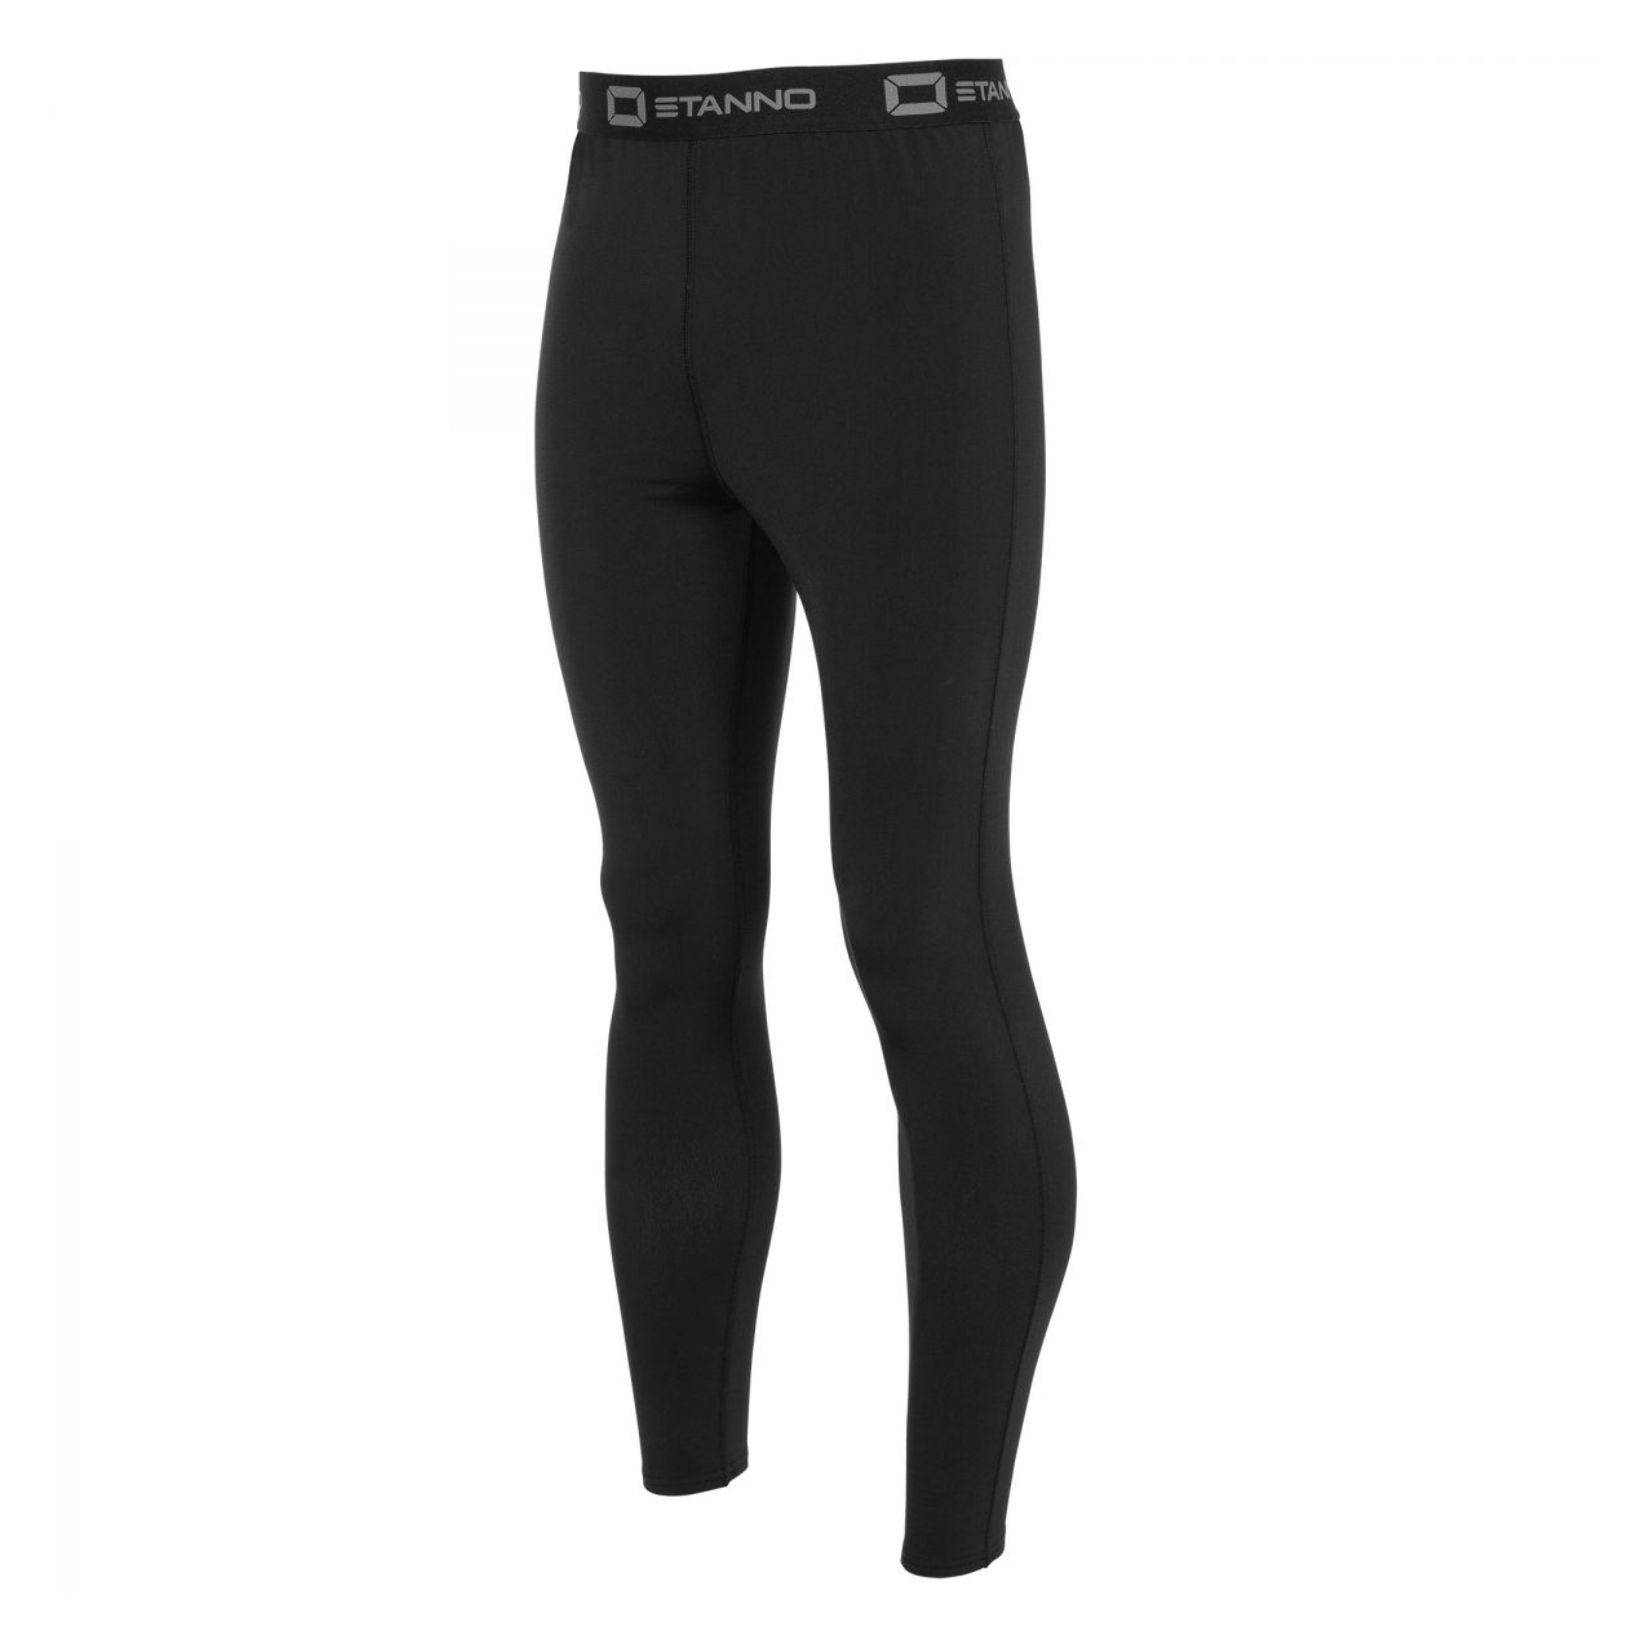 Stanno Thermo Pants